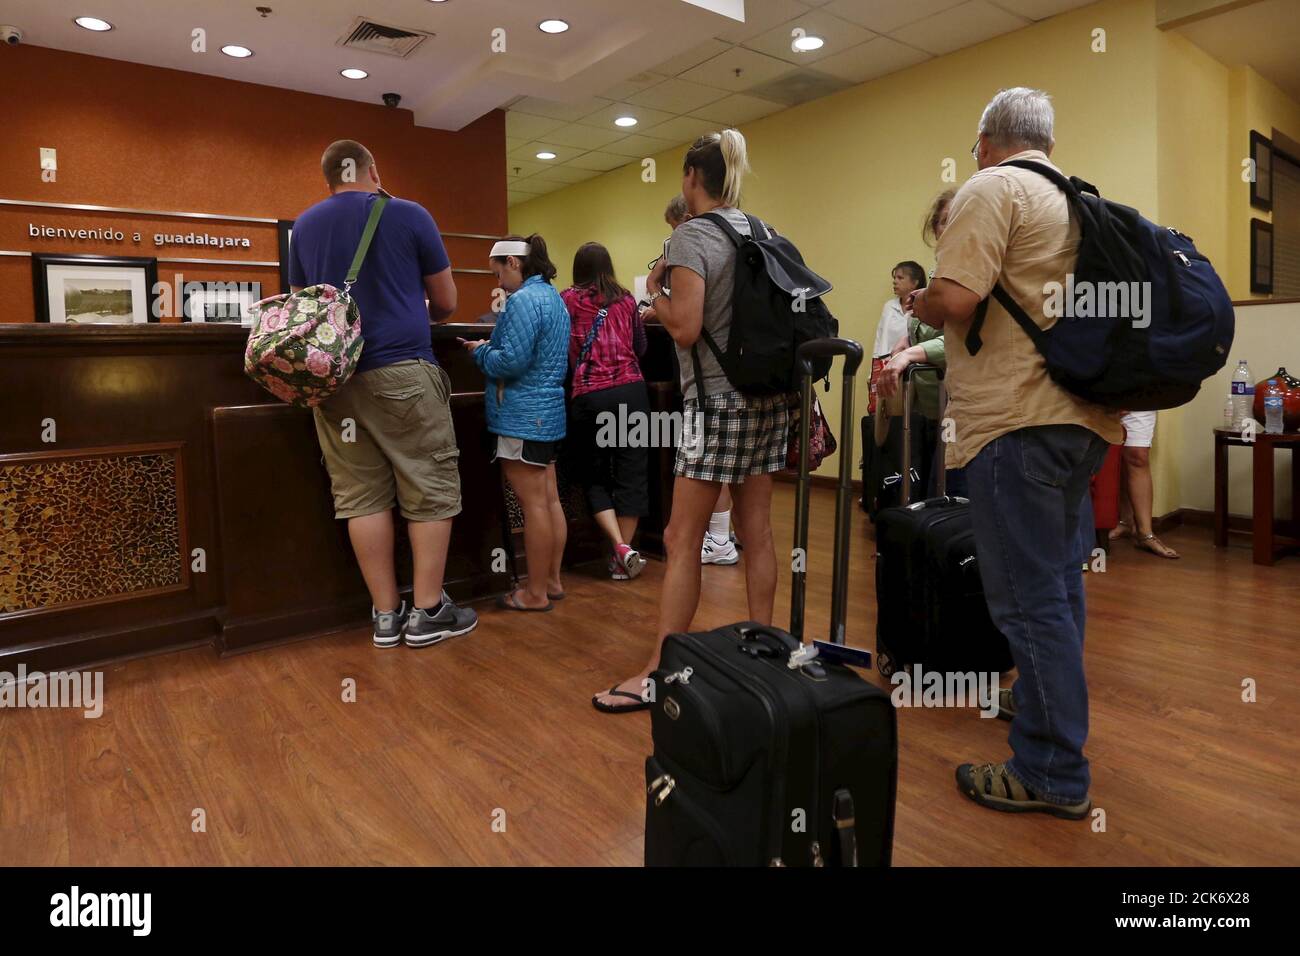 Tourists arriving from Puerto Vallarta are pictured at a hotel in Guadalajara, Mexico October 23, 2015. Hurricane Patricia, one of the most powerful storms on record, struck Mexico's Pacific coast on Friday with destructive winds that tore down trees, moved cars and forced thousands of people to flee homes and beachfront resorts. With winds of 160 miles per hour (266 km per hour), the Category 5 hurricane had western Mexico on high alert, with the popular resort of Puerto Vallarta and others on the coast opening emergency shelters as hotels were closed. REUTERS/Edgard Garrido Stock Photo